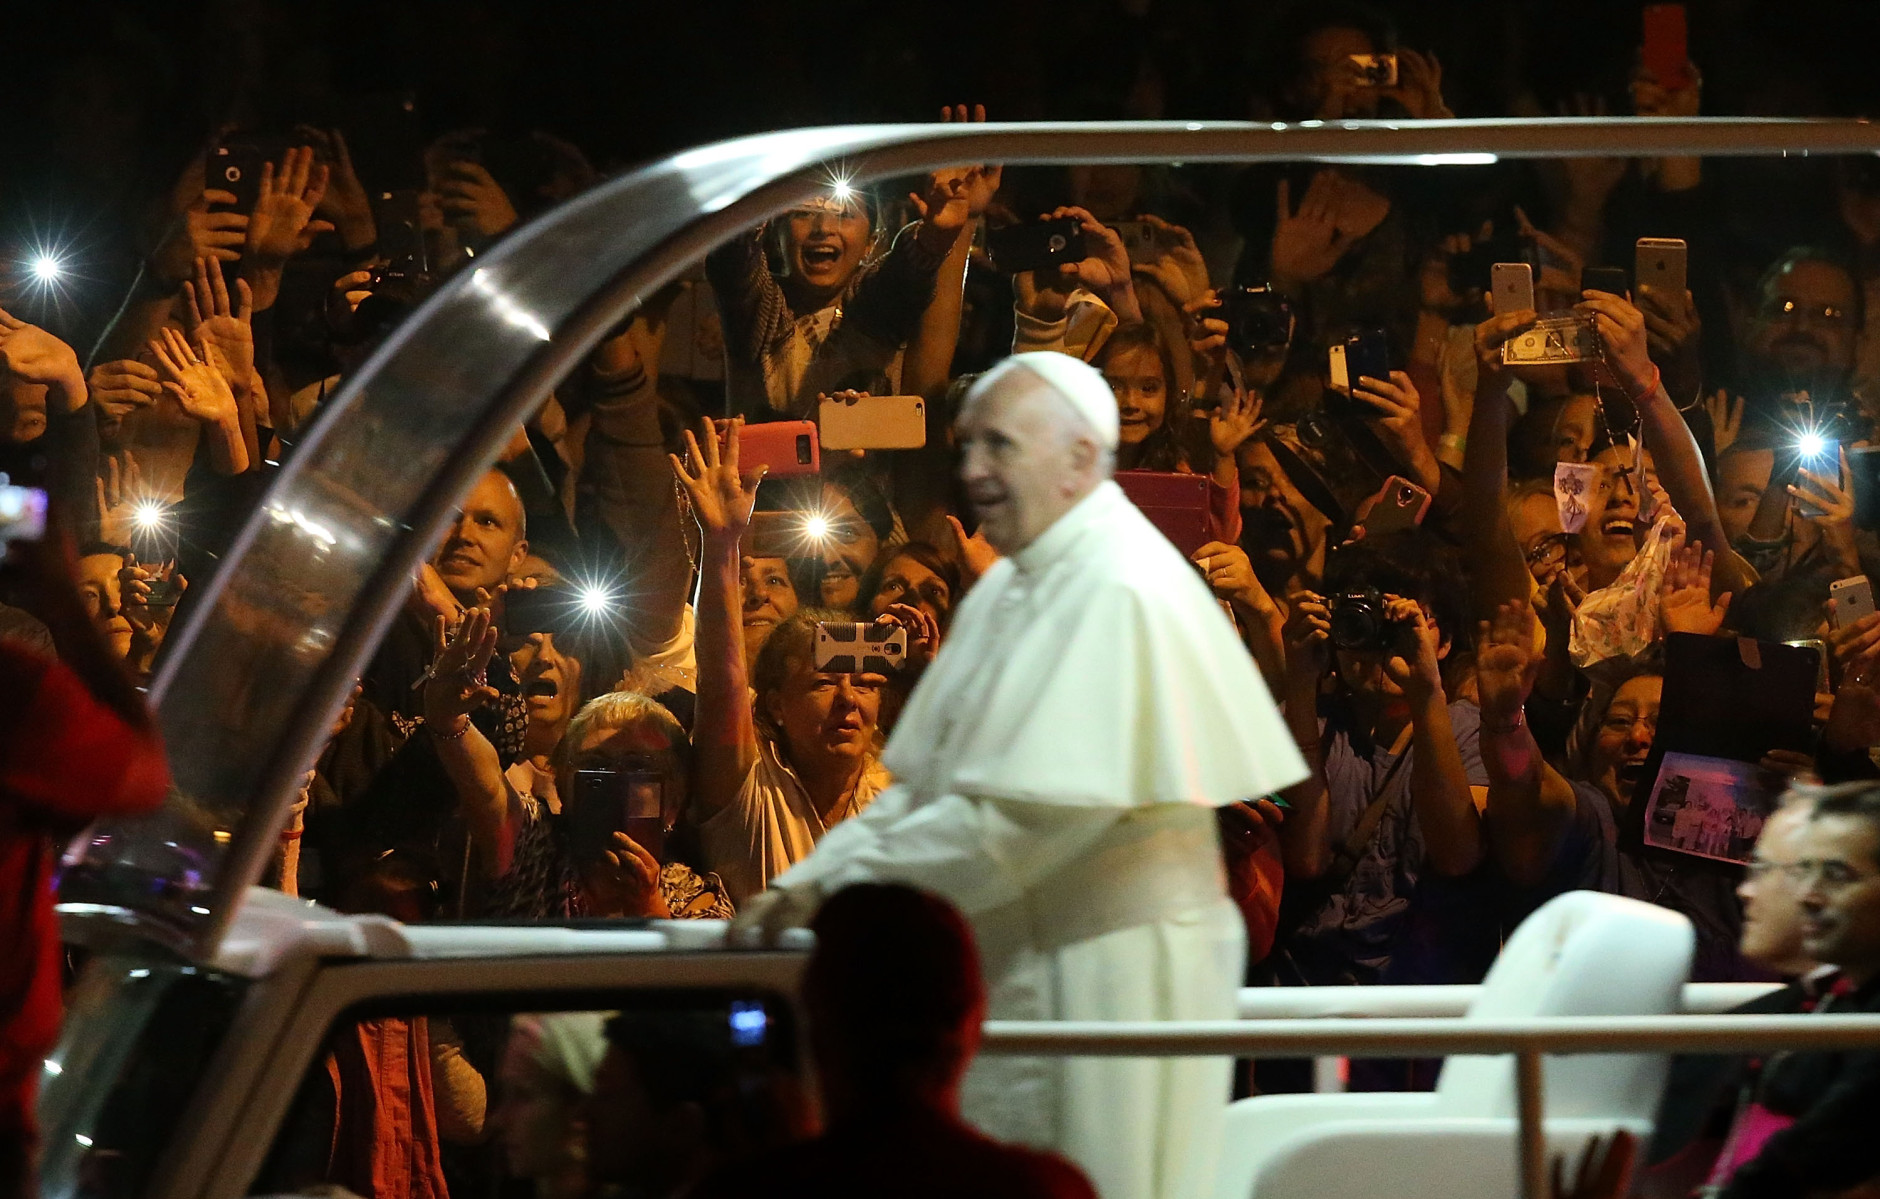 PHILADELPHIA, PA - SEPTEMBER 26:  Spectators react as Pope Francis rides by in the Popemobile as he arrives at the Festival of Families on September 26, 2015 in Philadelphia, Pennsylvania.  Pope Francis is wrapping up his trip to the United States with two days in Philadelphia where he will attend the Festival of Families and will meet with prisoners at the Curran-Fromhold Correctional Facility.  (Photo by Justin Sullivan/Getty Images)